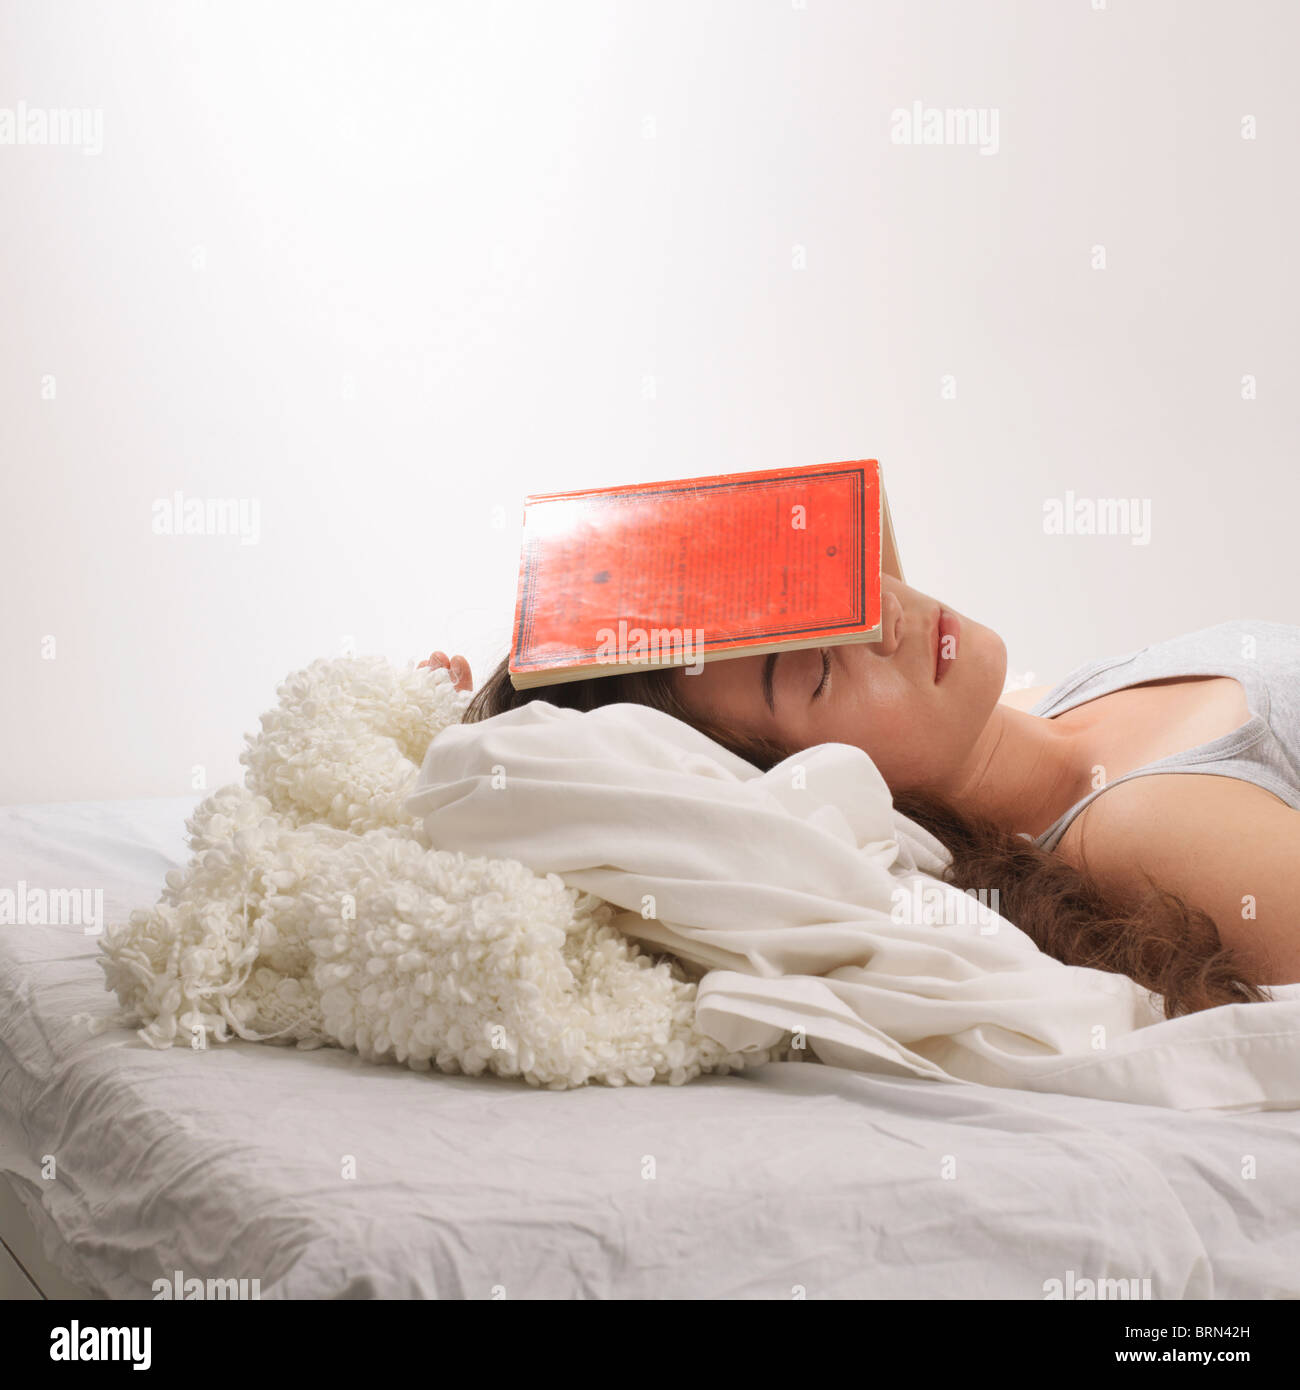 Woman with book on her head Stock Photo